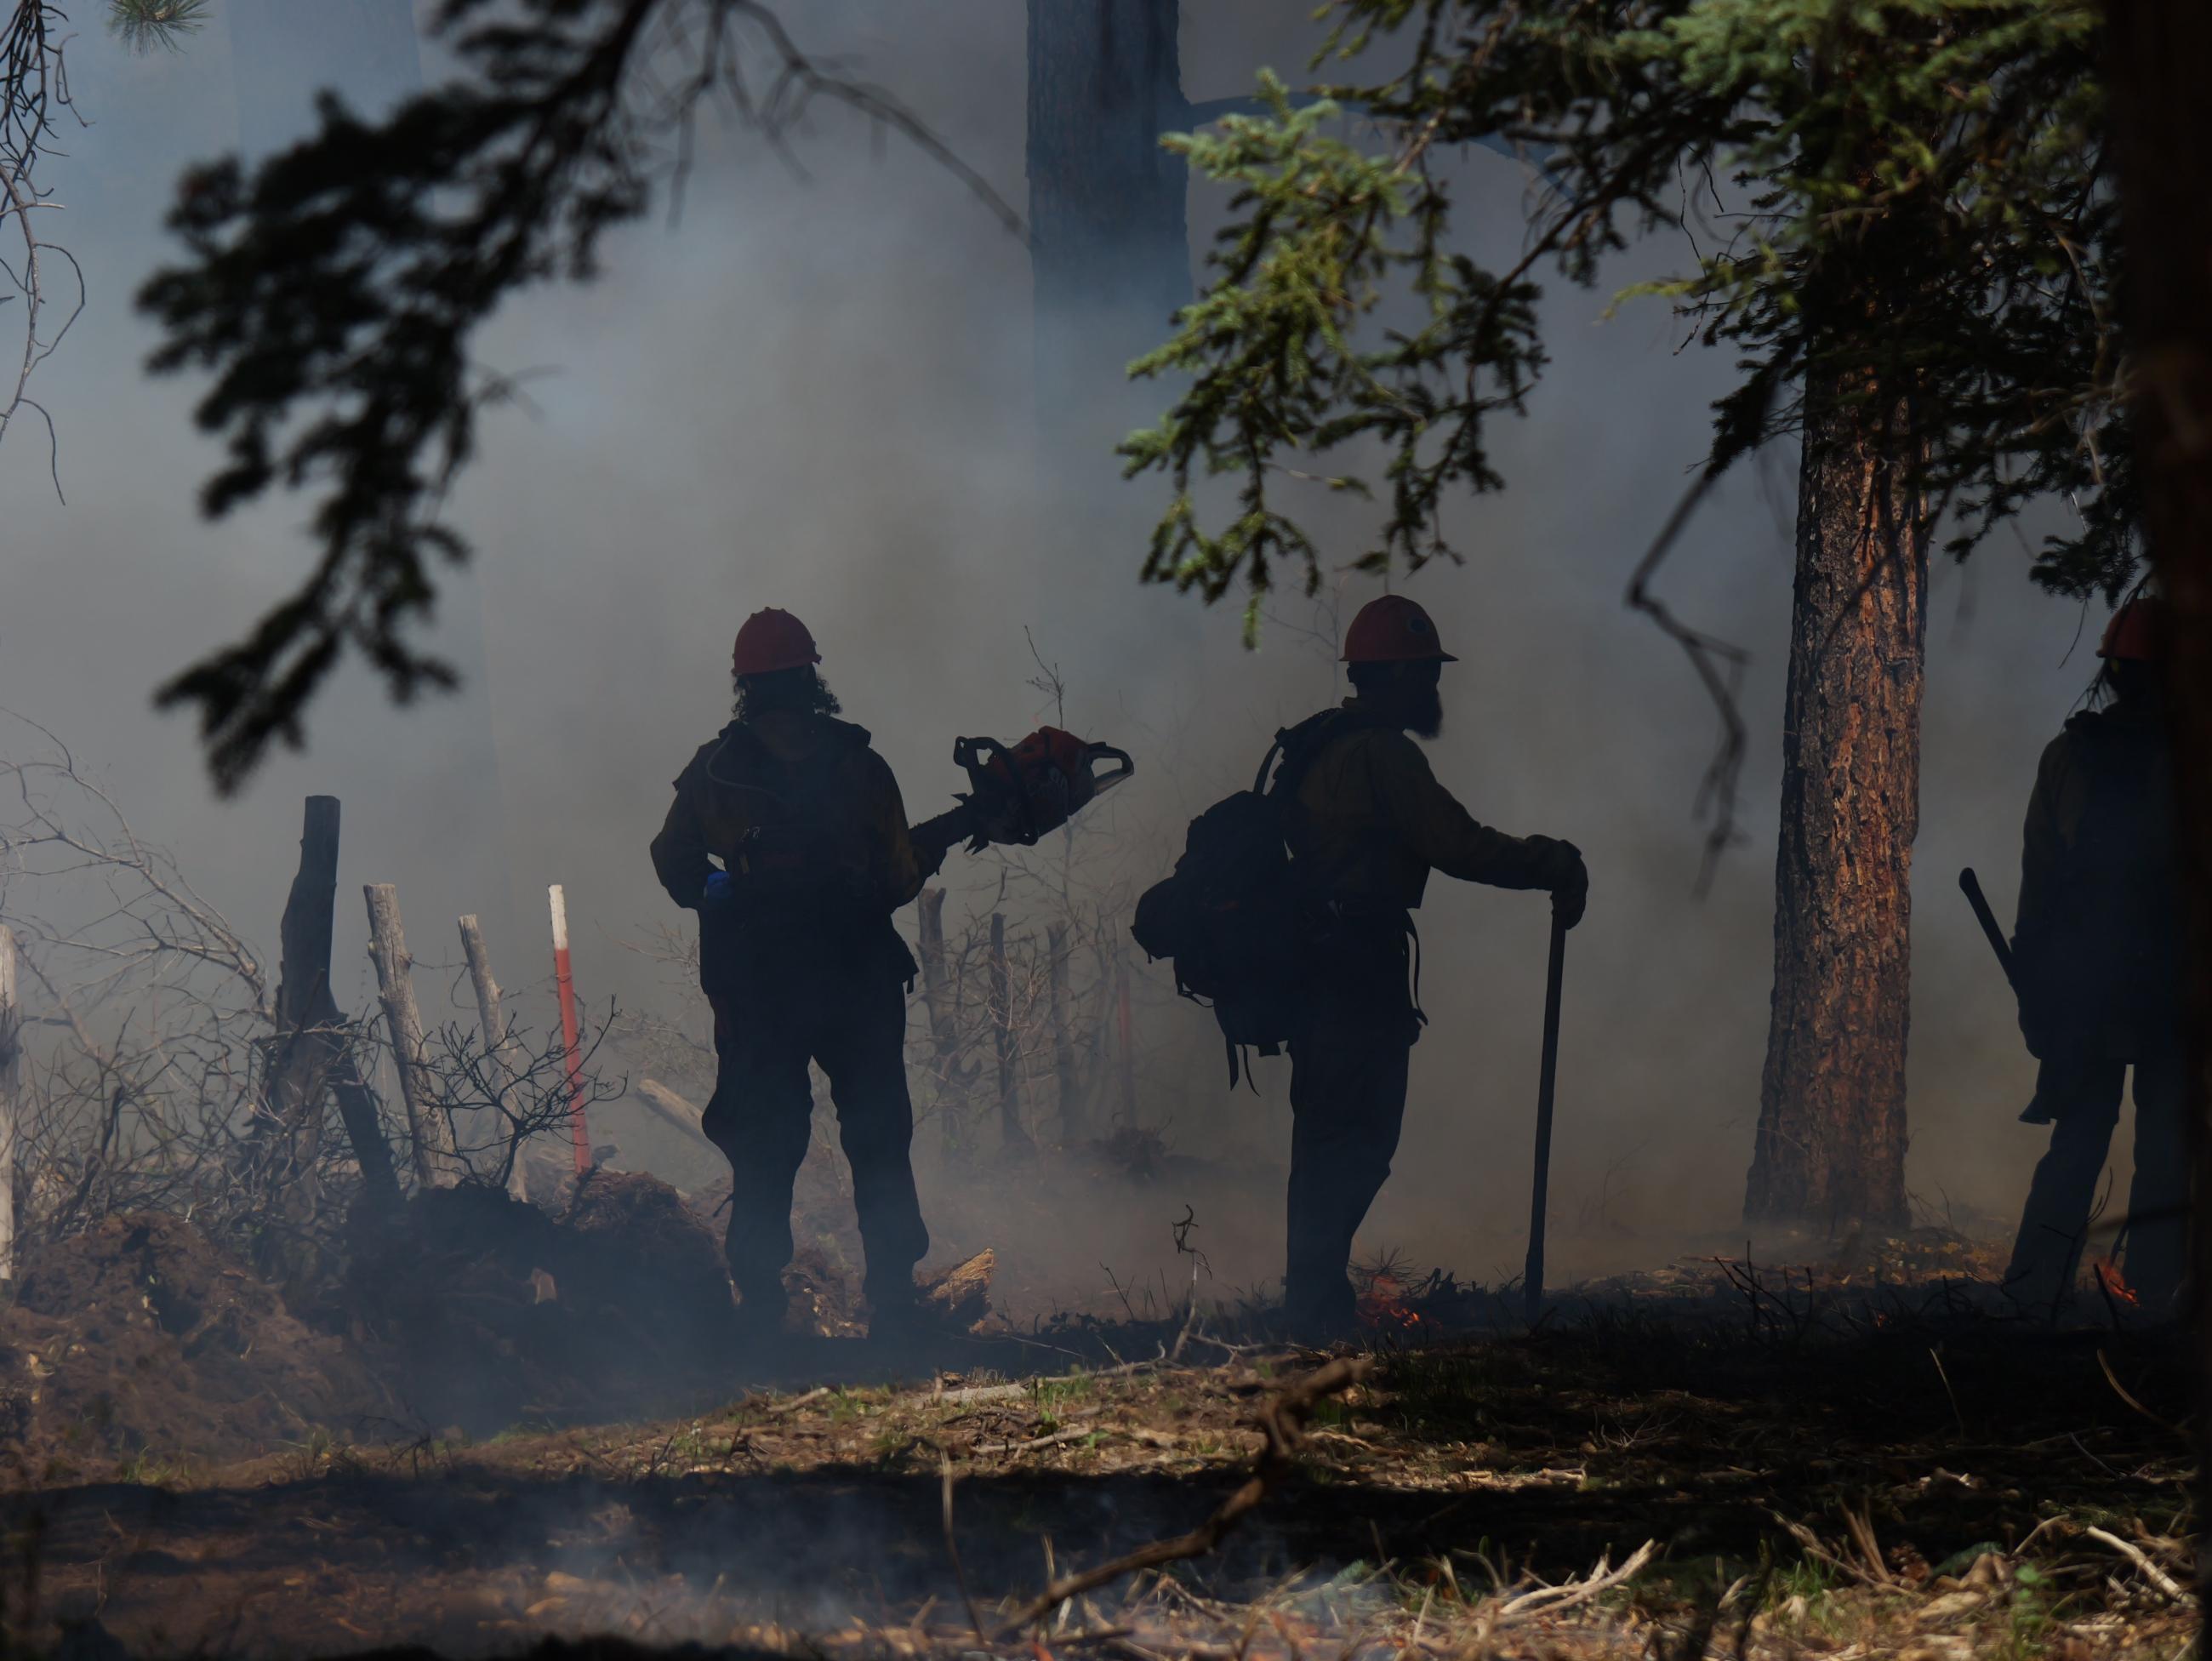 Firefighters are silhouetted in smoke. One is seen lifting a chain saw.